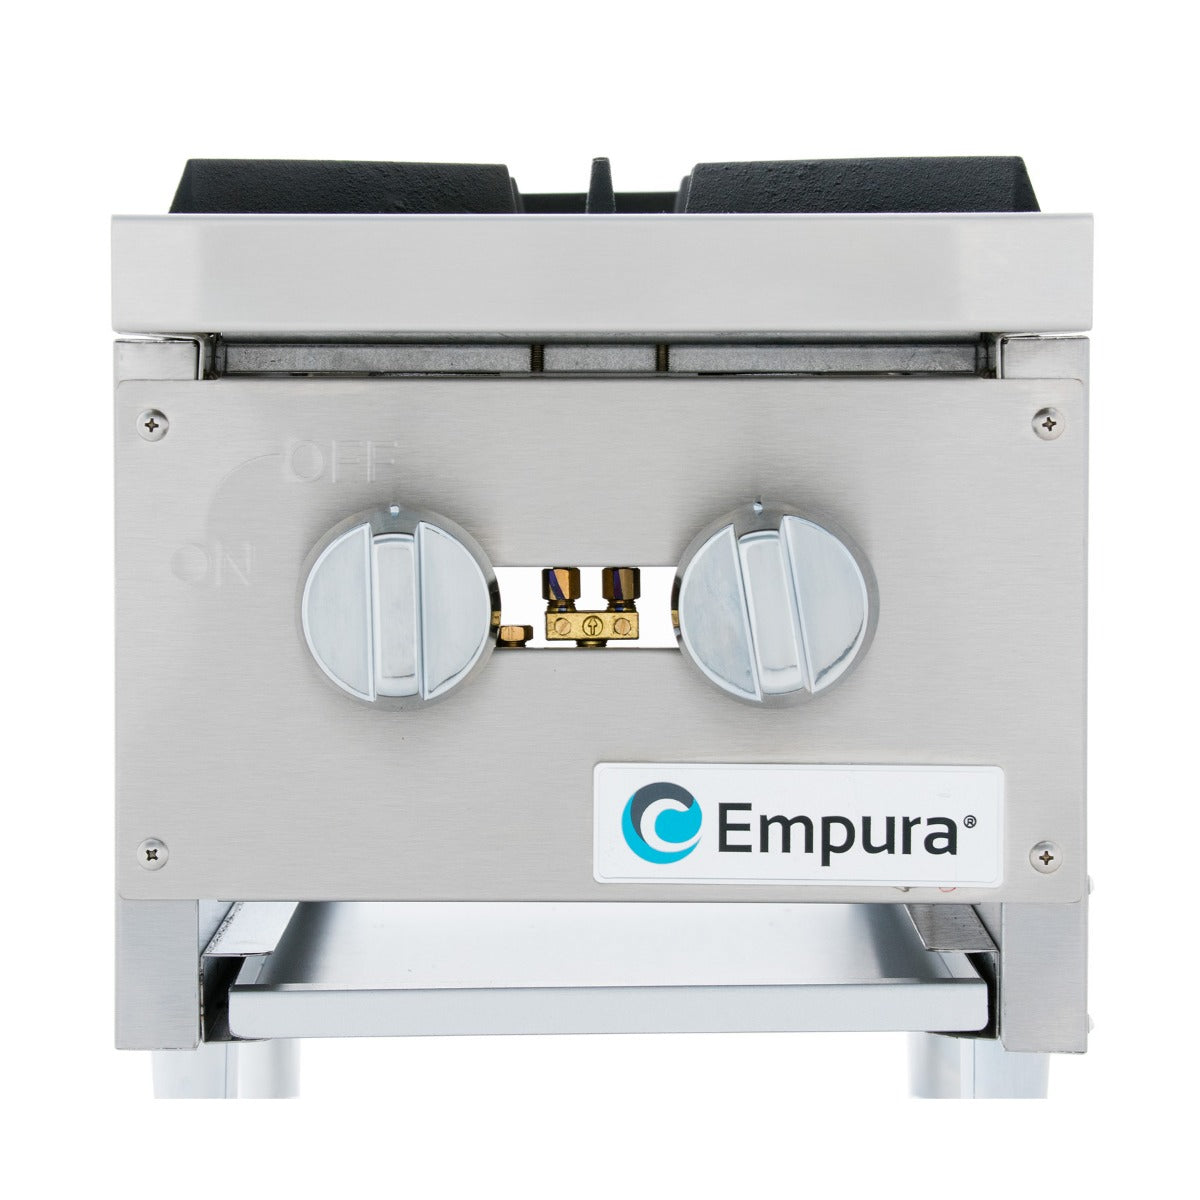 Empura EMHP2-HD 12" Stainless Steel Heavy Duty Gas Hot Plate With 2 Burners, 60,000 BTU